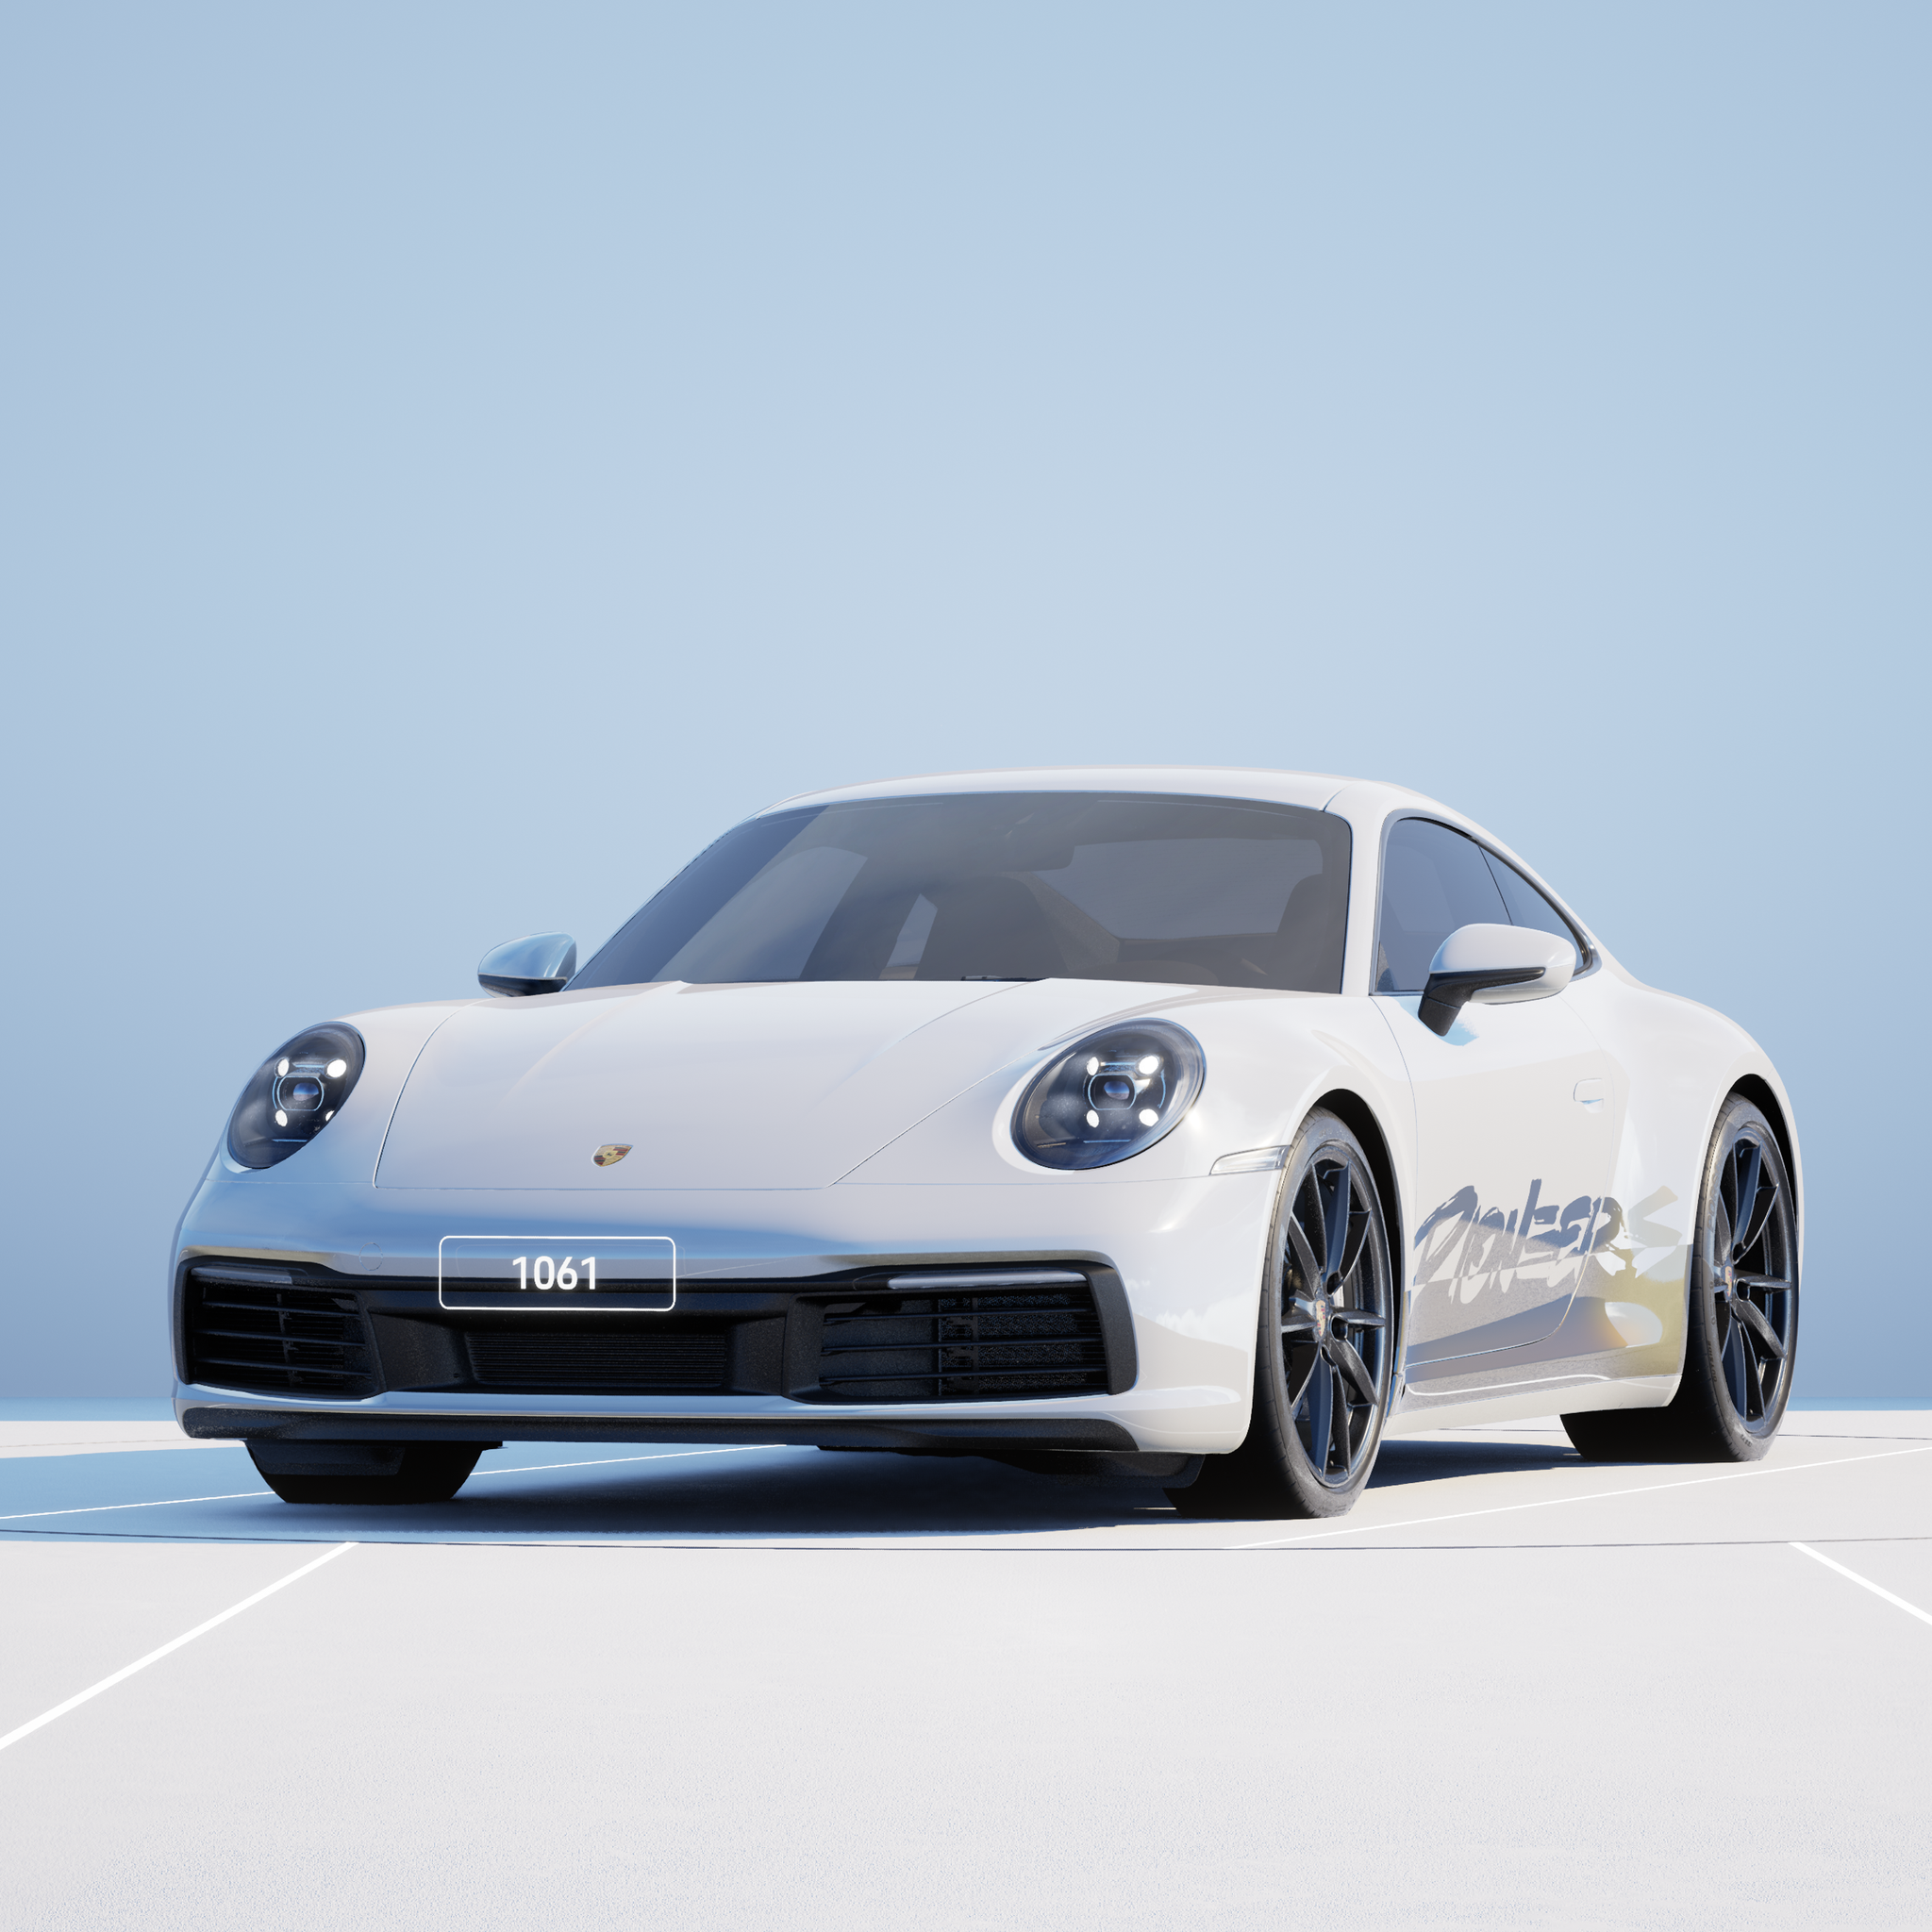 The PORSCHΞ 911 1061 image in phase